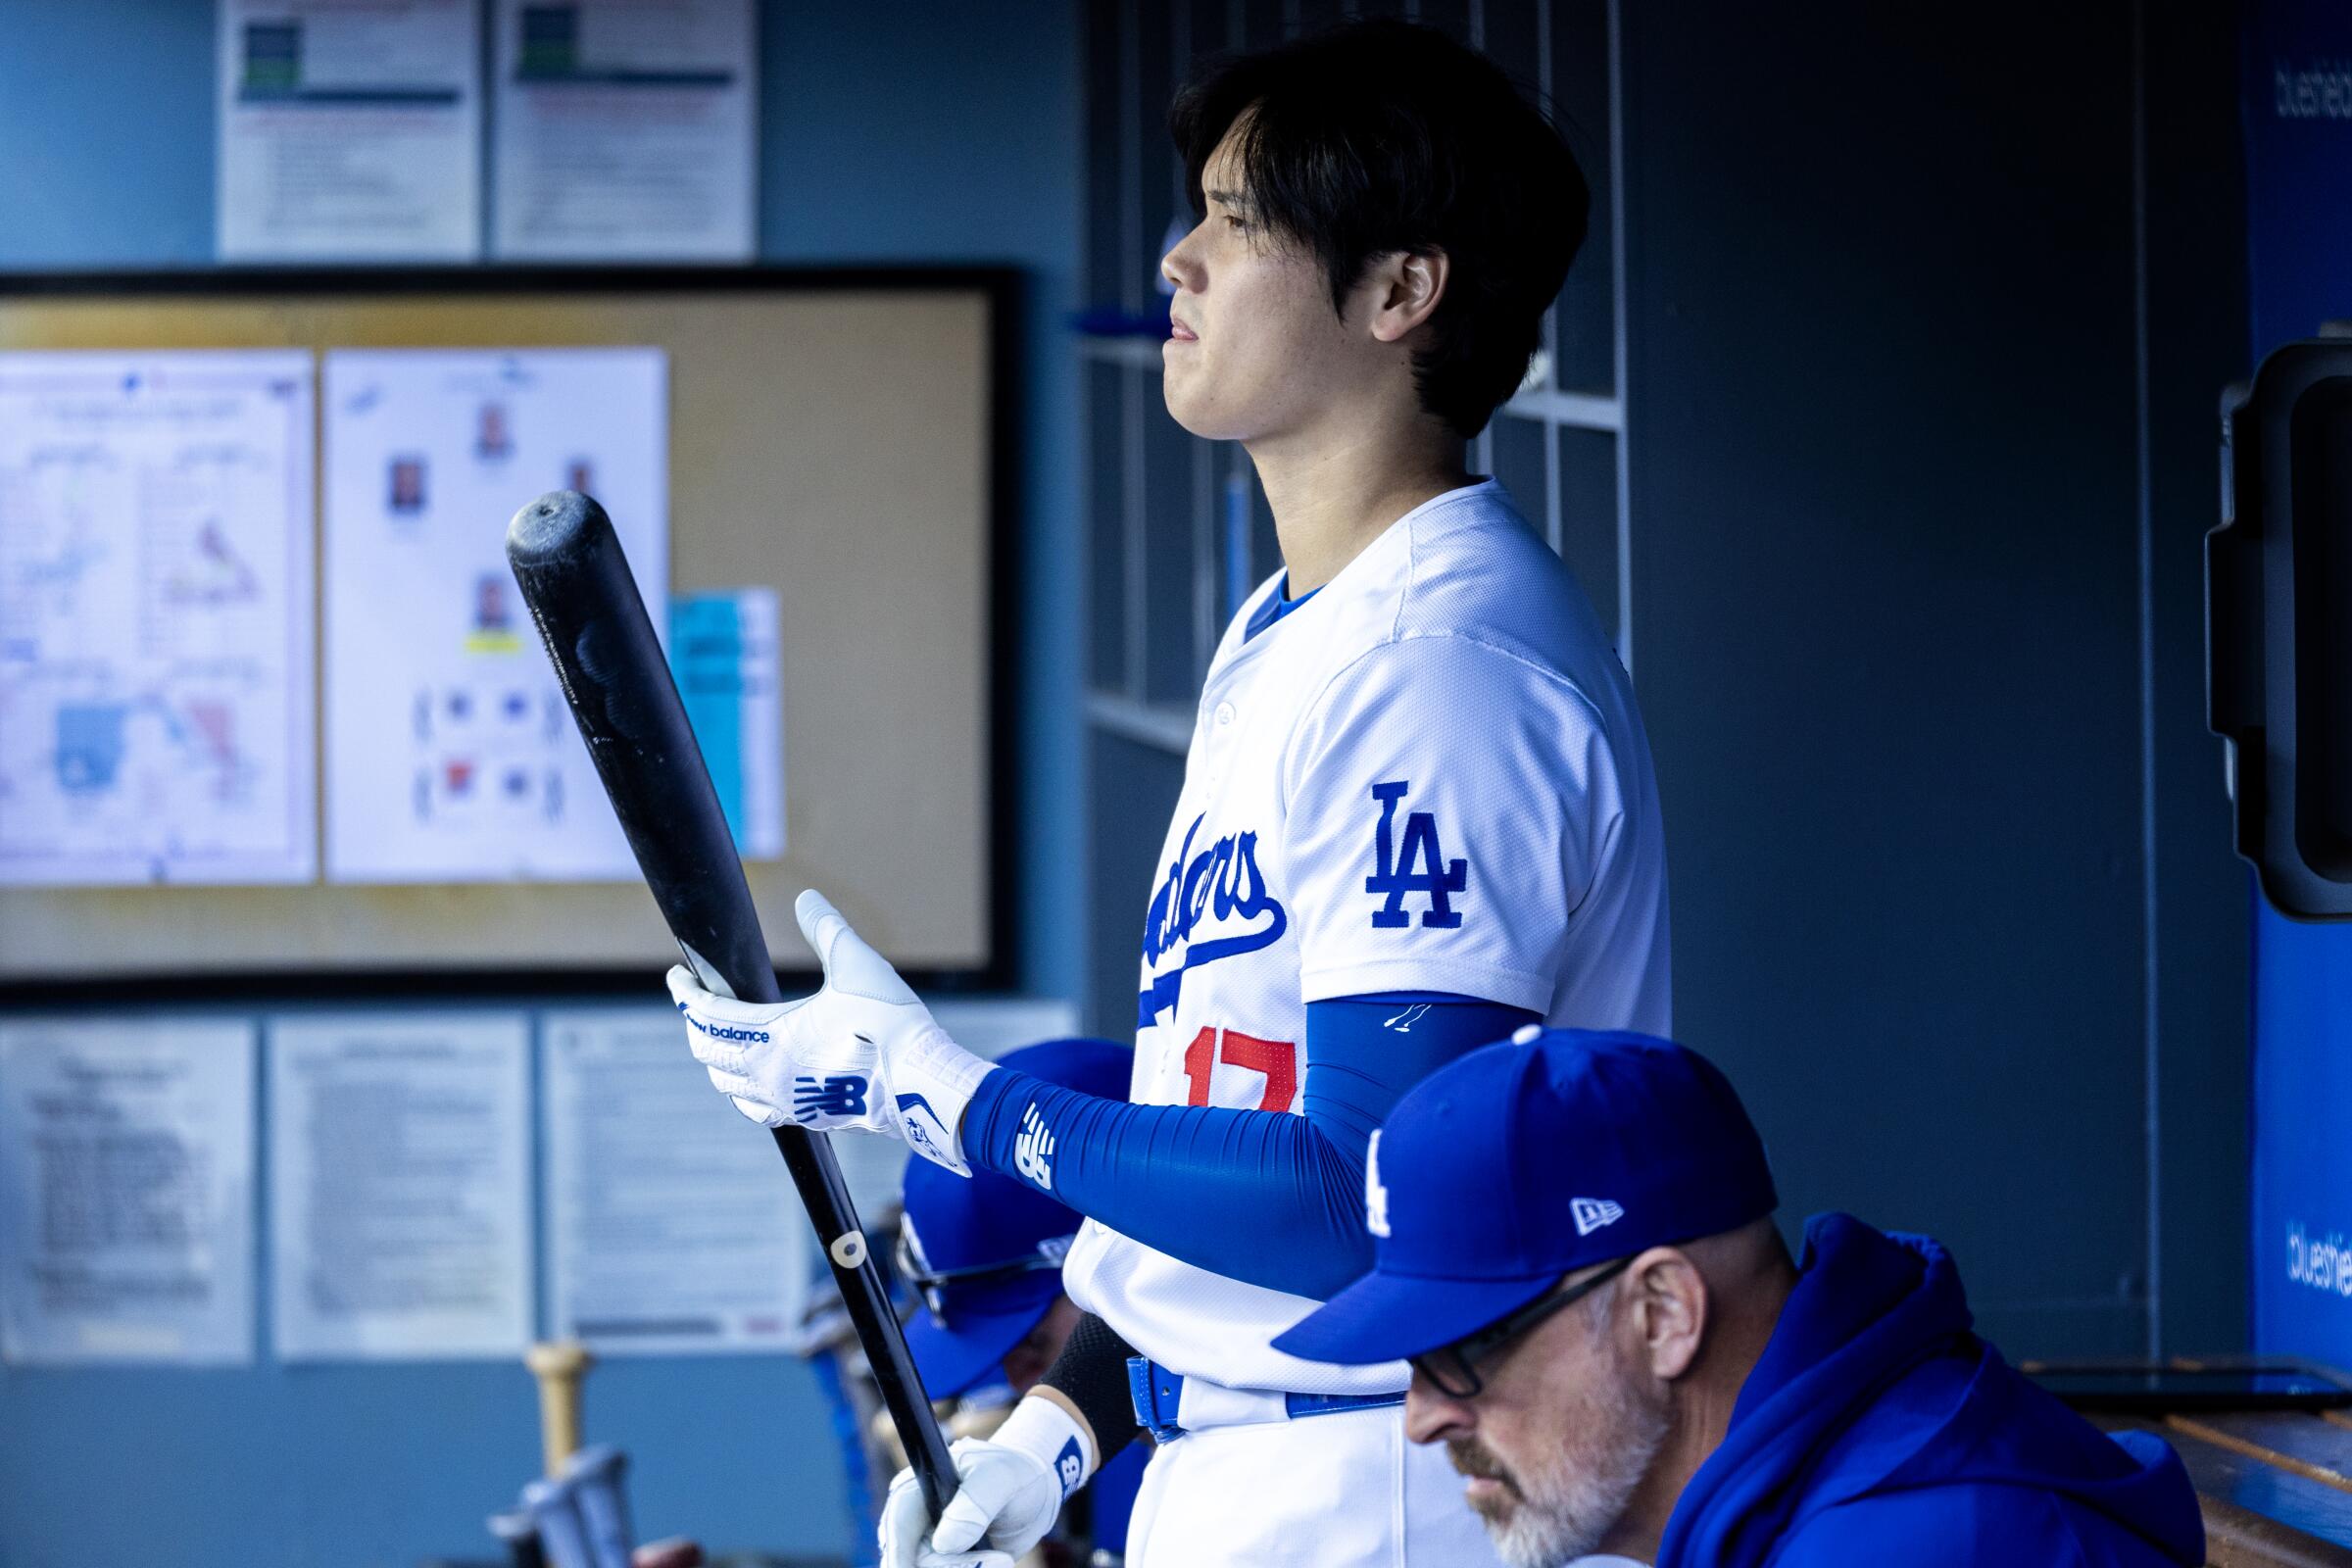 Shohei Ohtani stands in the dugout during a game against the St Louis Cardinals at Dodger Stadium on March 31.